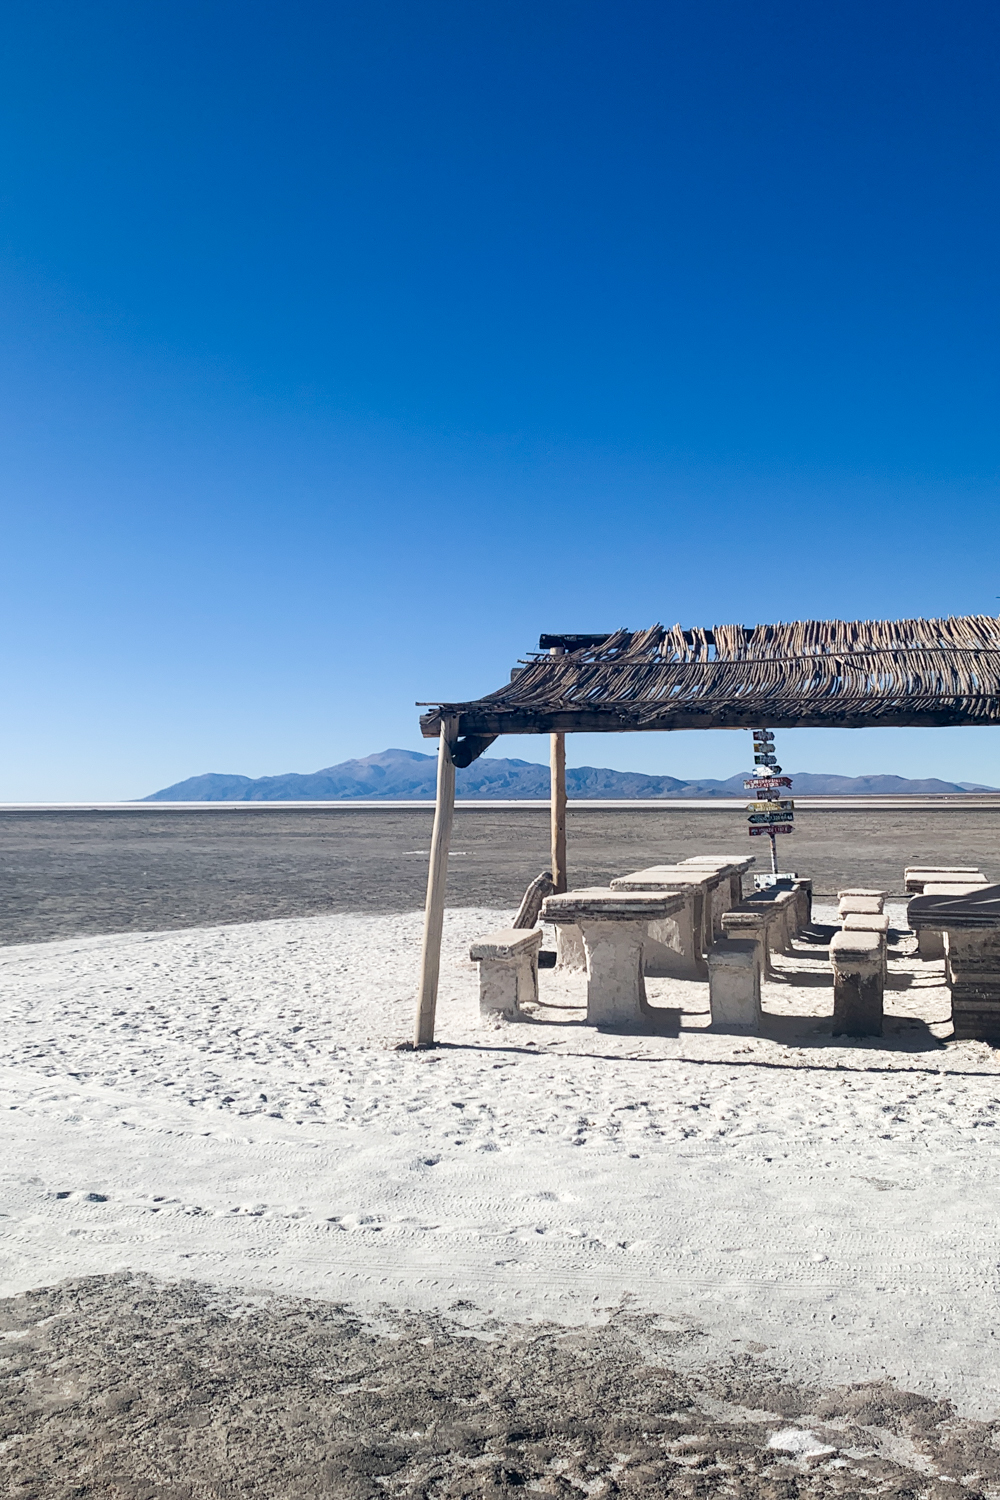 Salinas Grandes welcome station